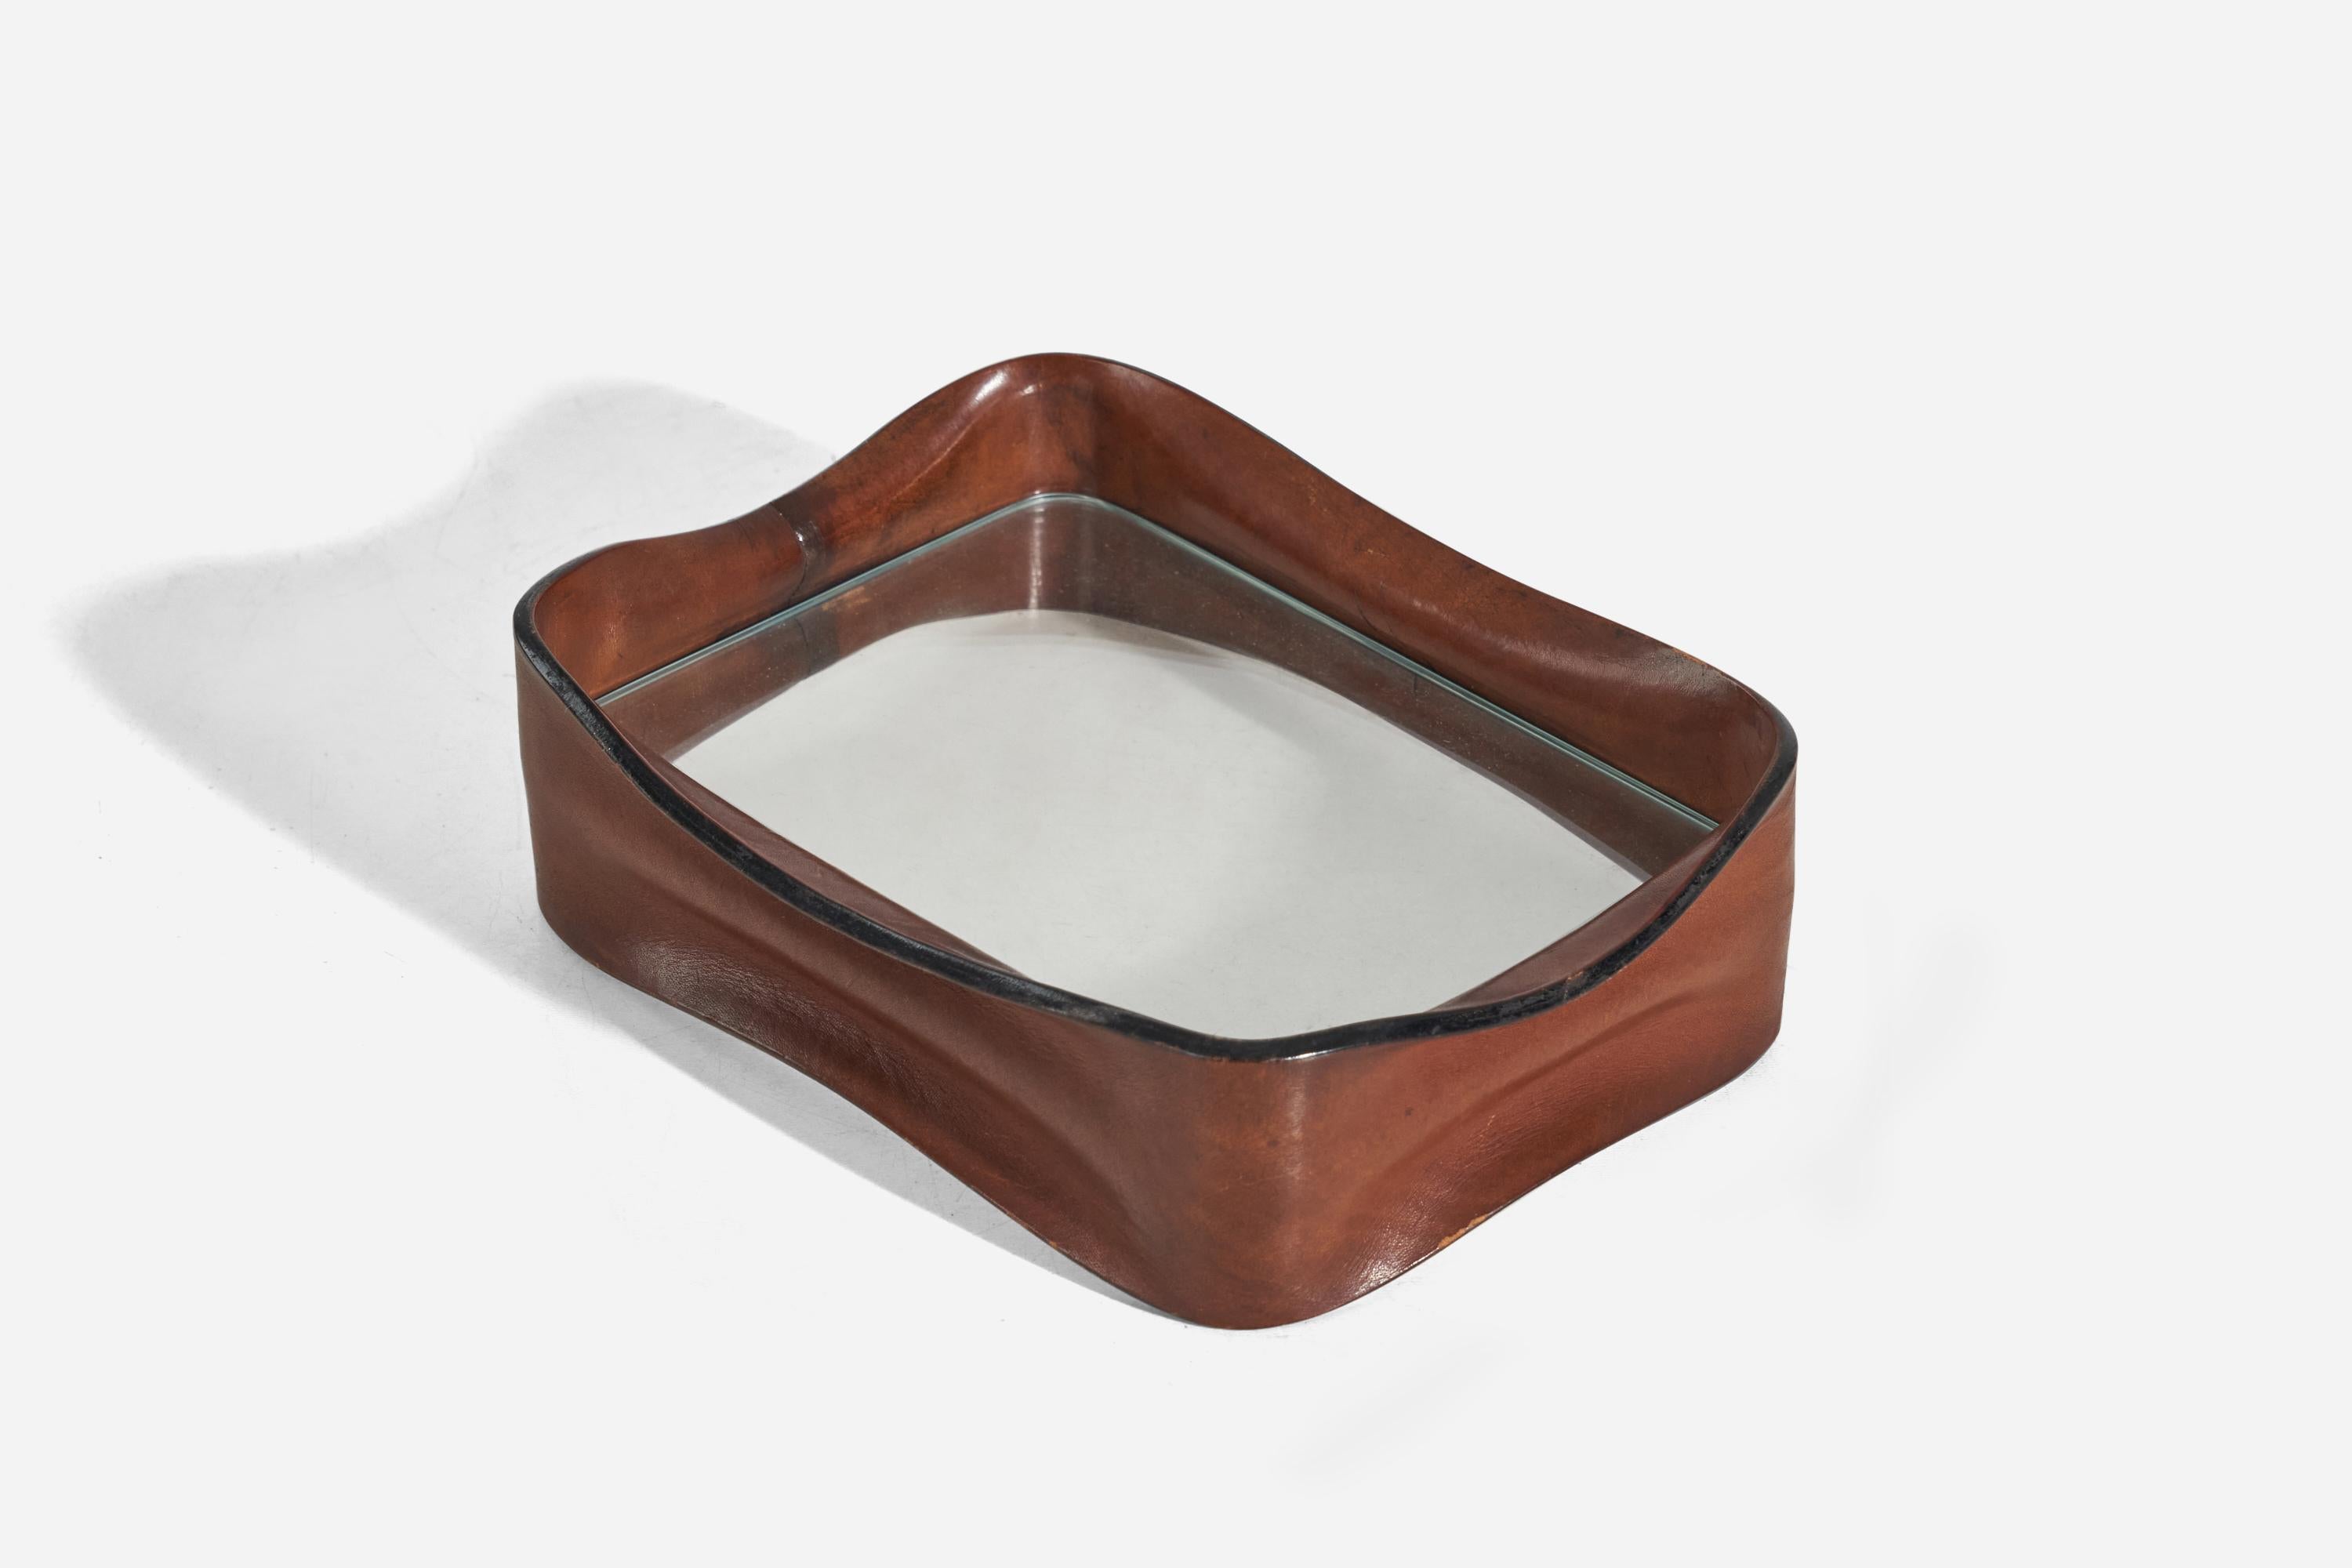 A wet-moulded leather and glass vide-poche or tray designed and produced in Italy, c. 1940s.

